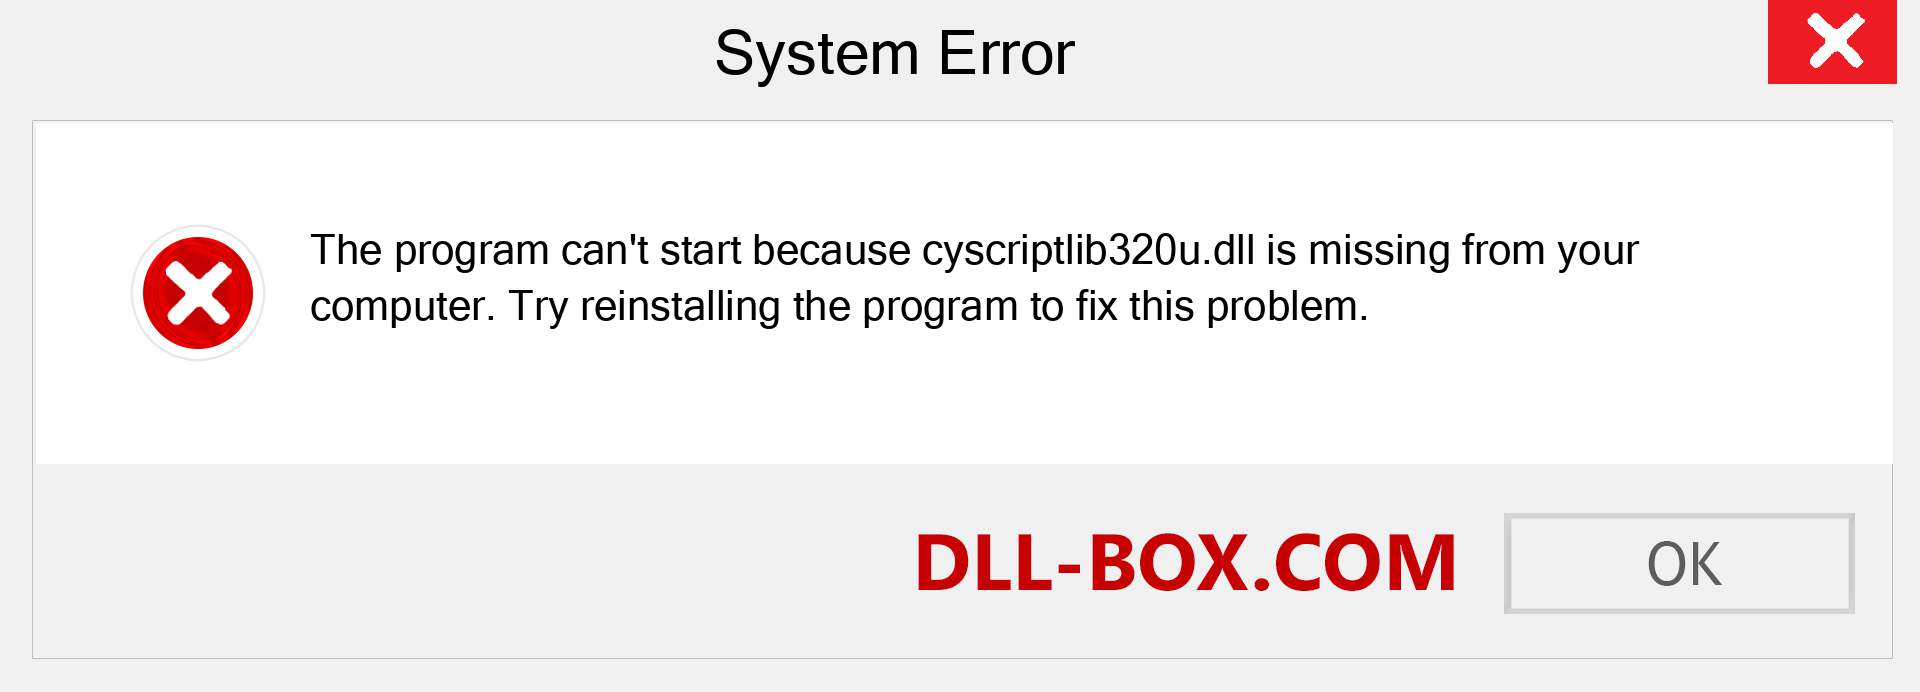  cyscriptlib320u.dll file is missing?. Download for Windows 7, 8, 10 - Fix  cyscriptlib320u dll Missing Error on Windows, photos, images